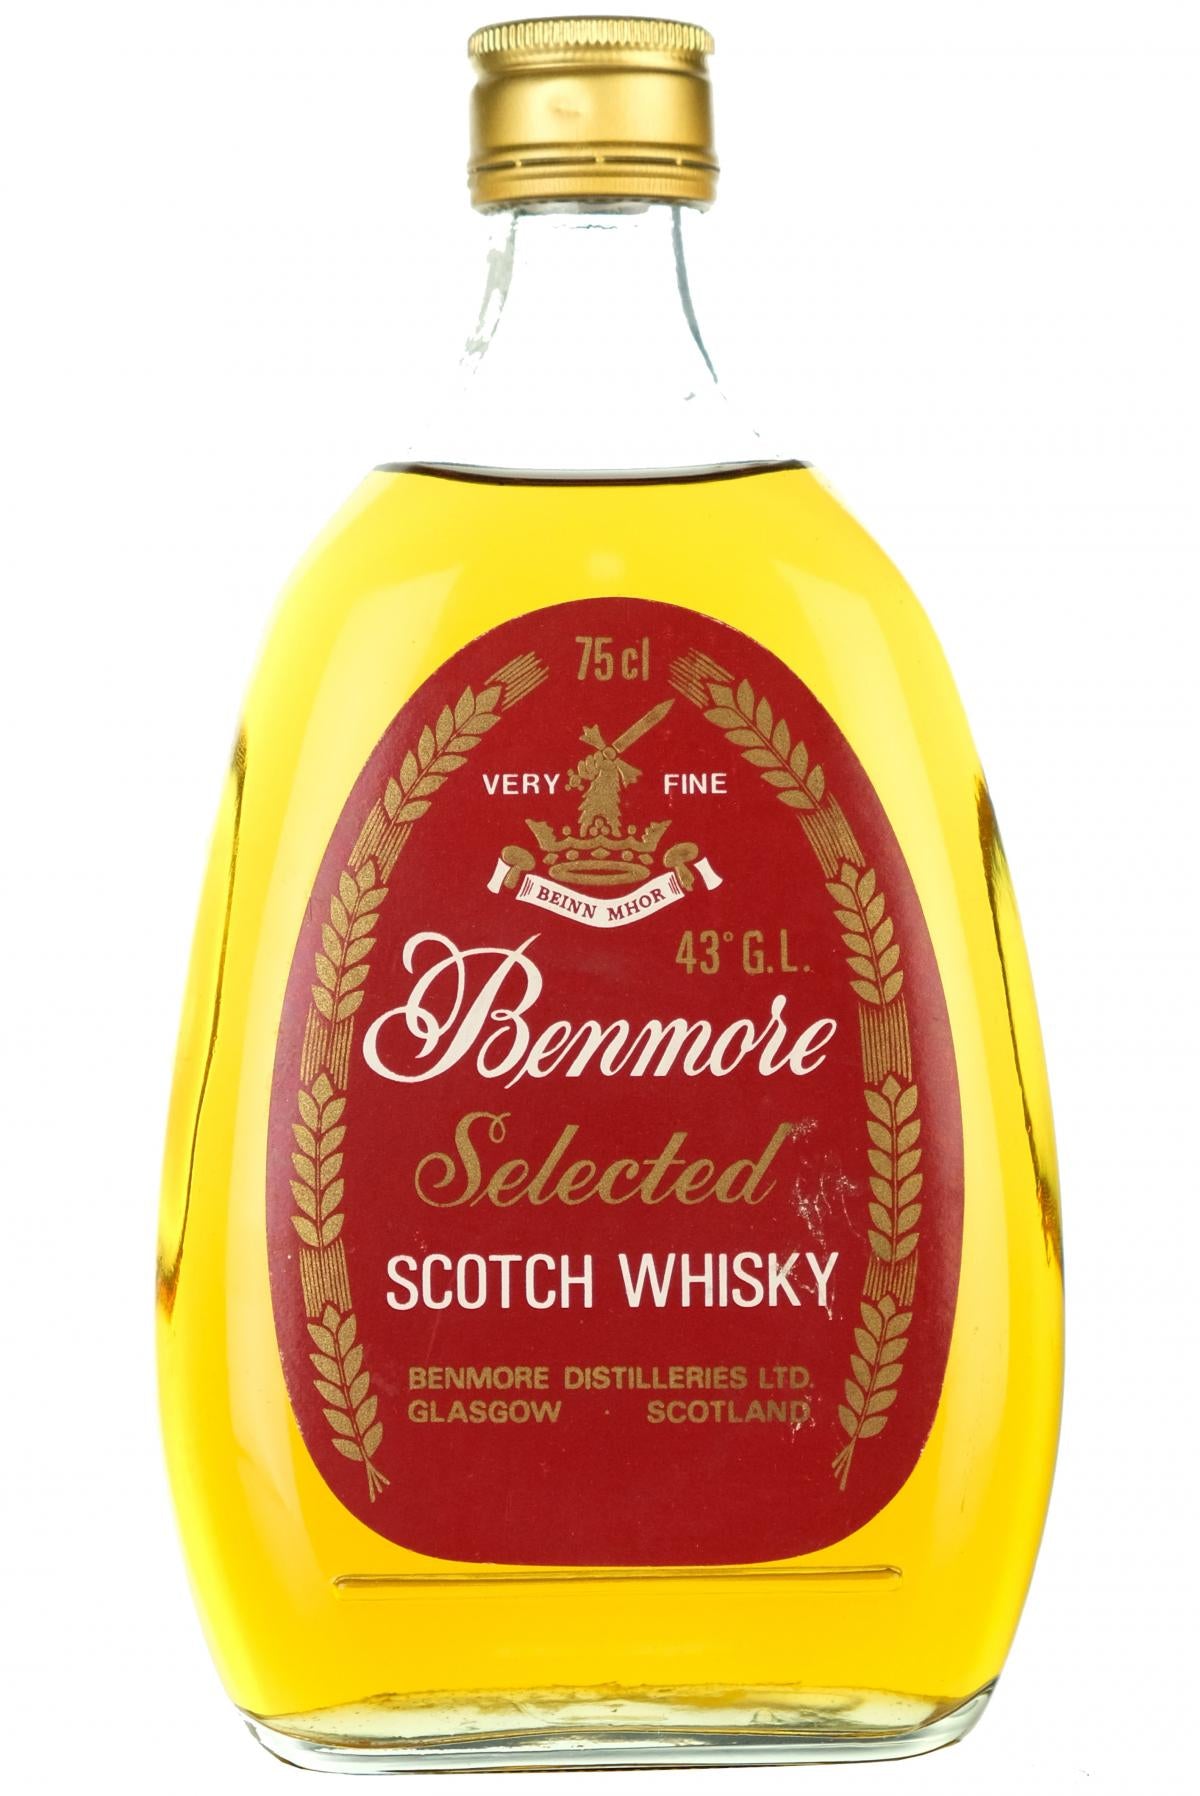 benmore - 75cl - Selected Scotch Whisky whiskey blend blended